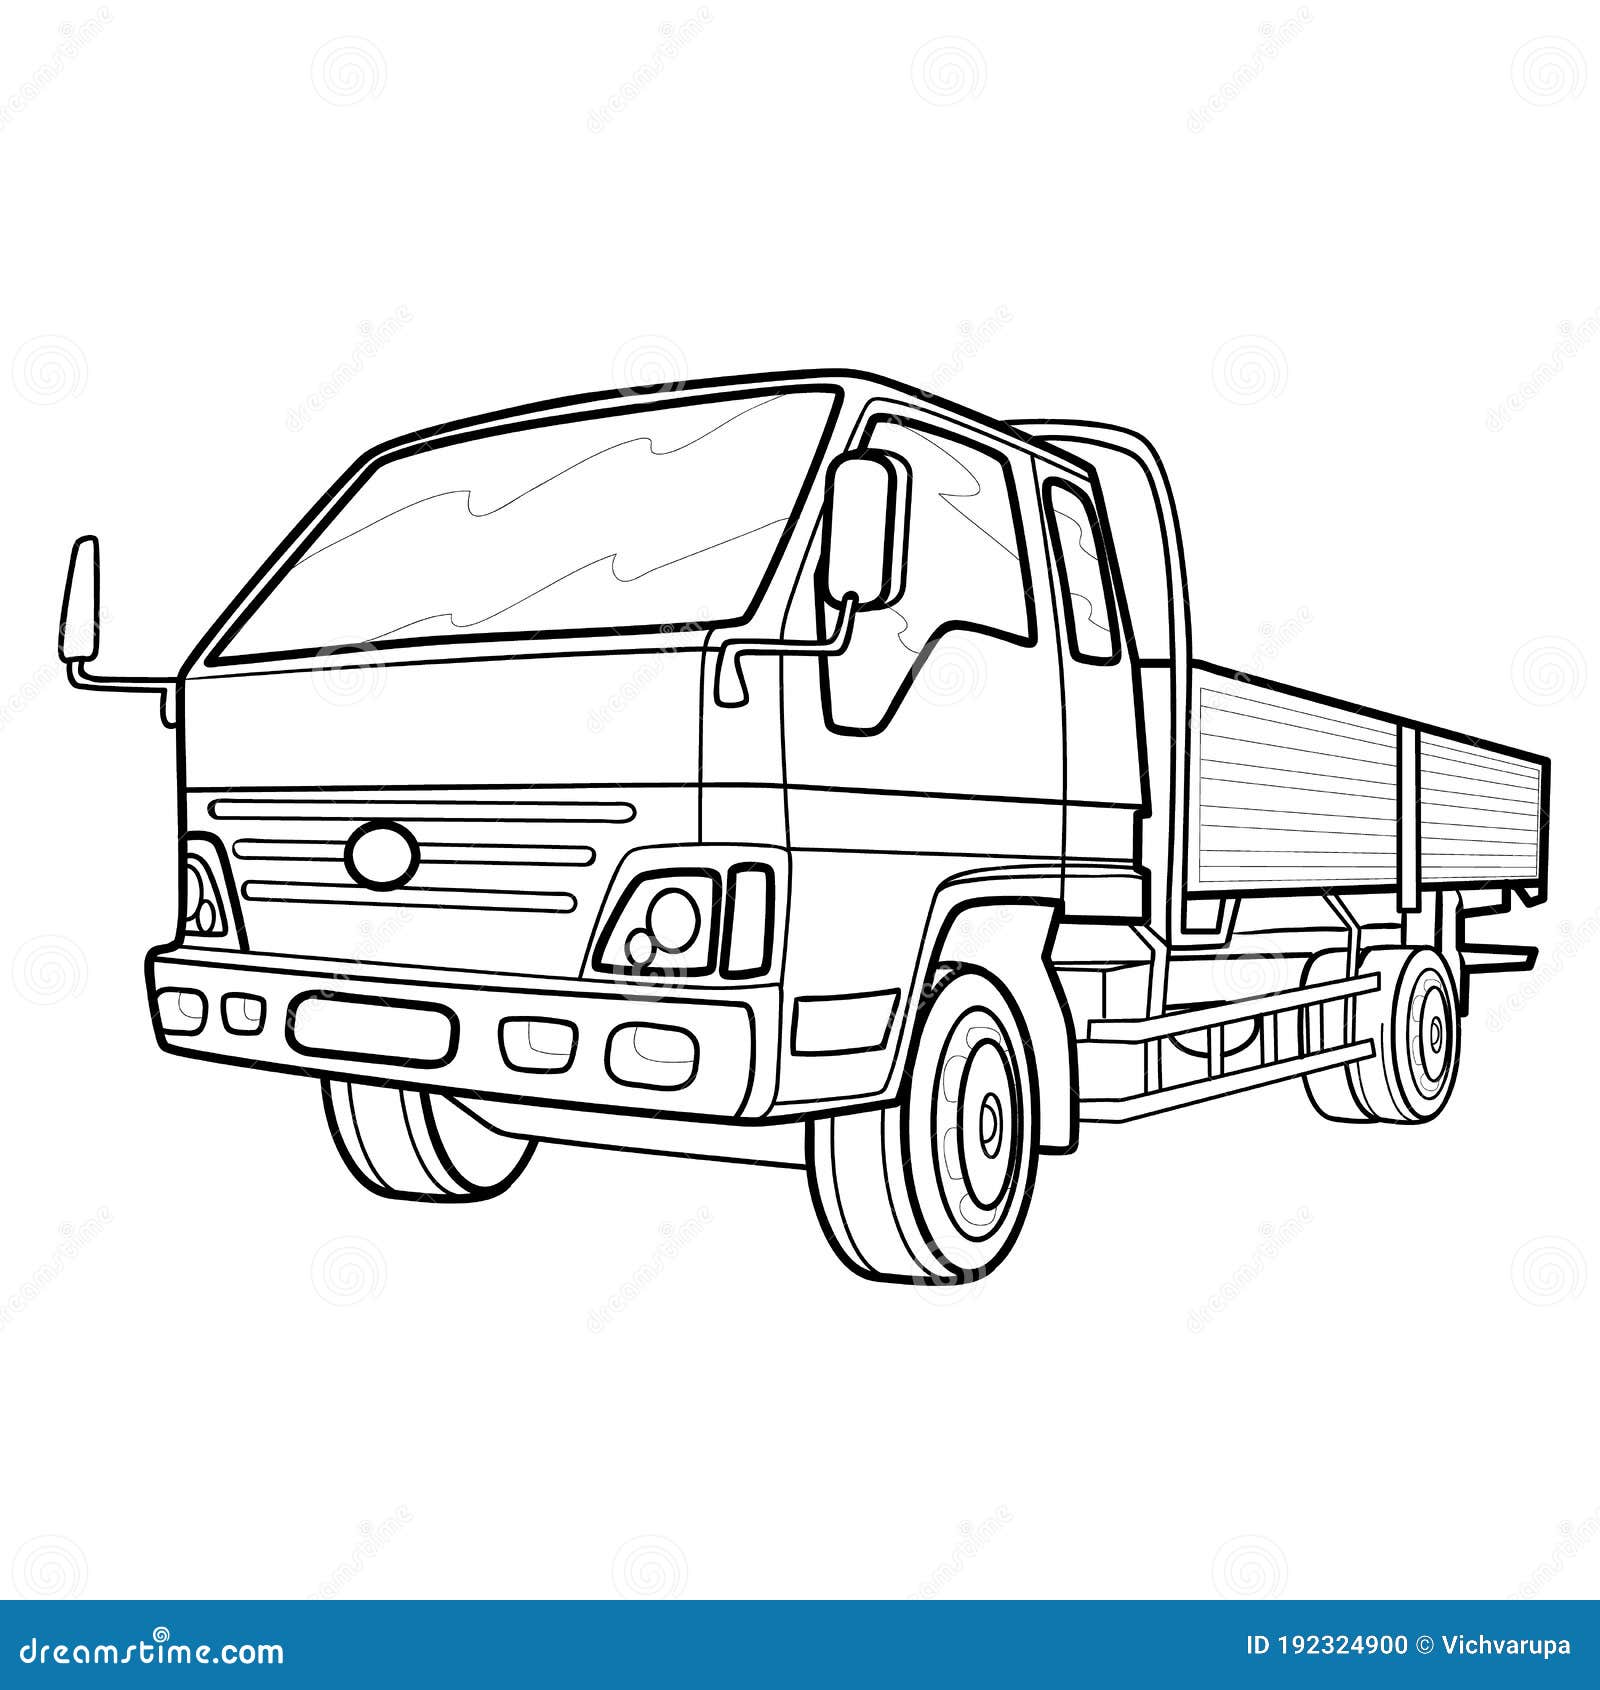 Sketch of a truck coloring book isolated object on white background vector illustration stock vector